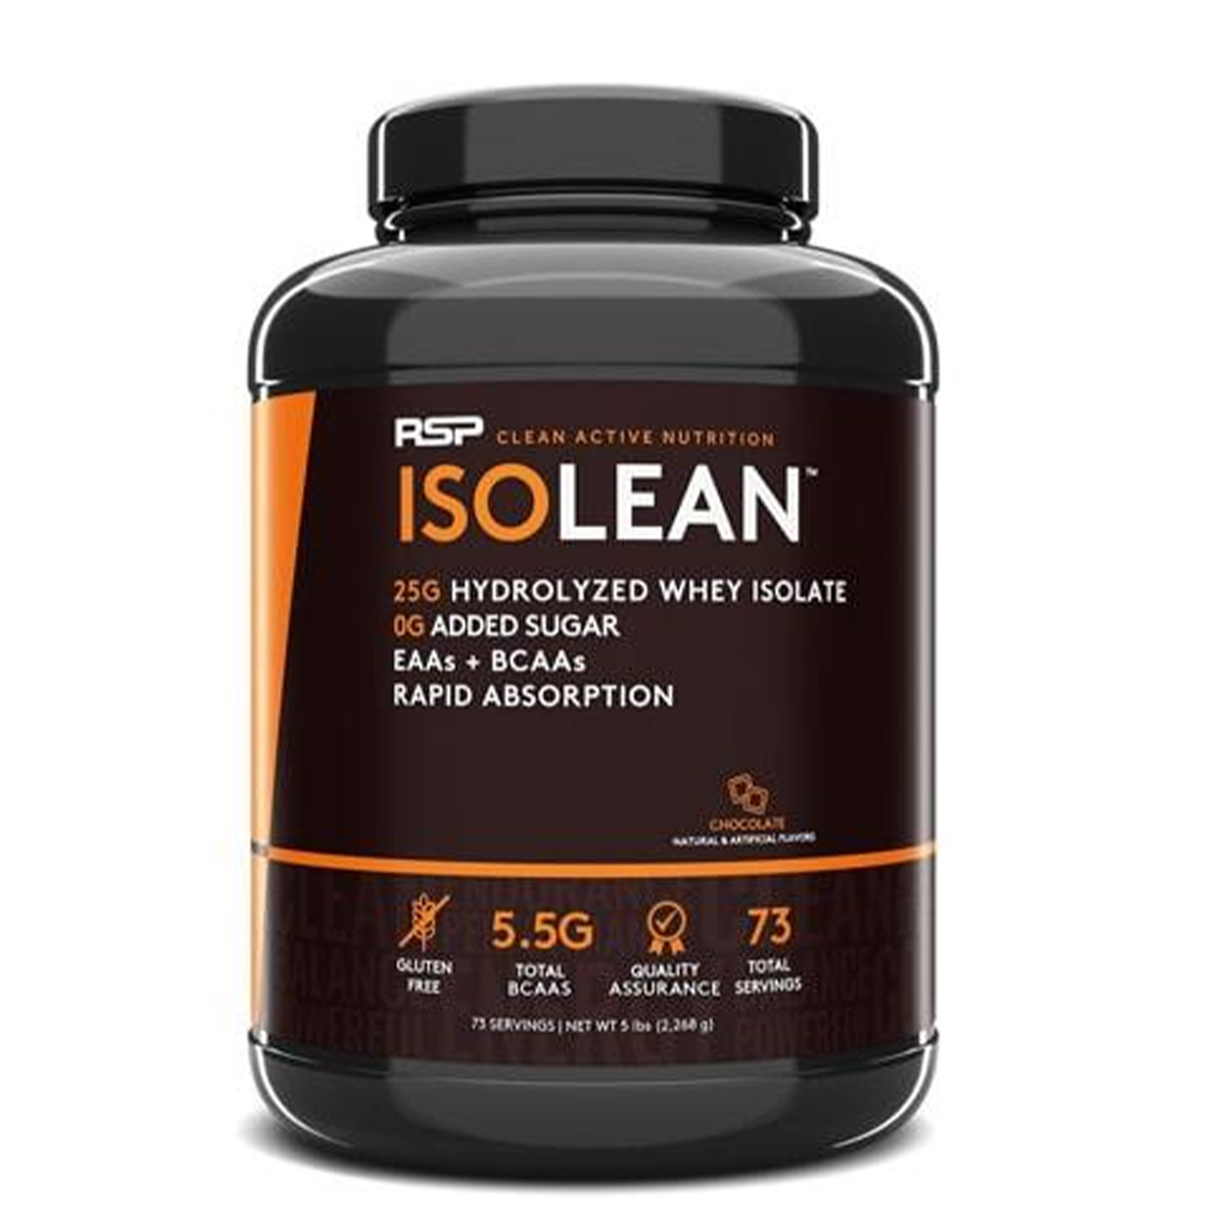 RSP Nutrition IsoLean 5 lbs - Whey Protein Isolate